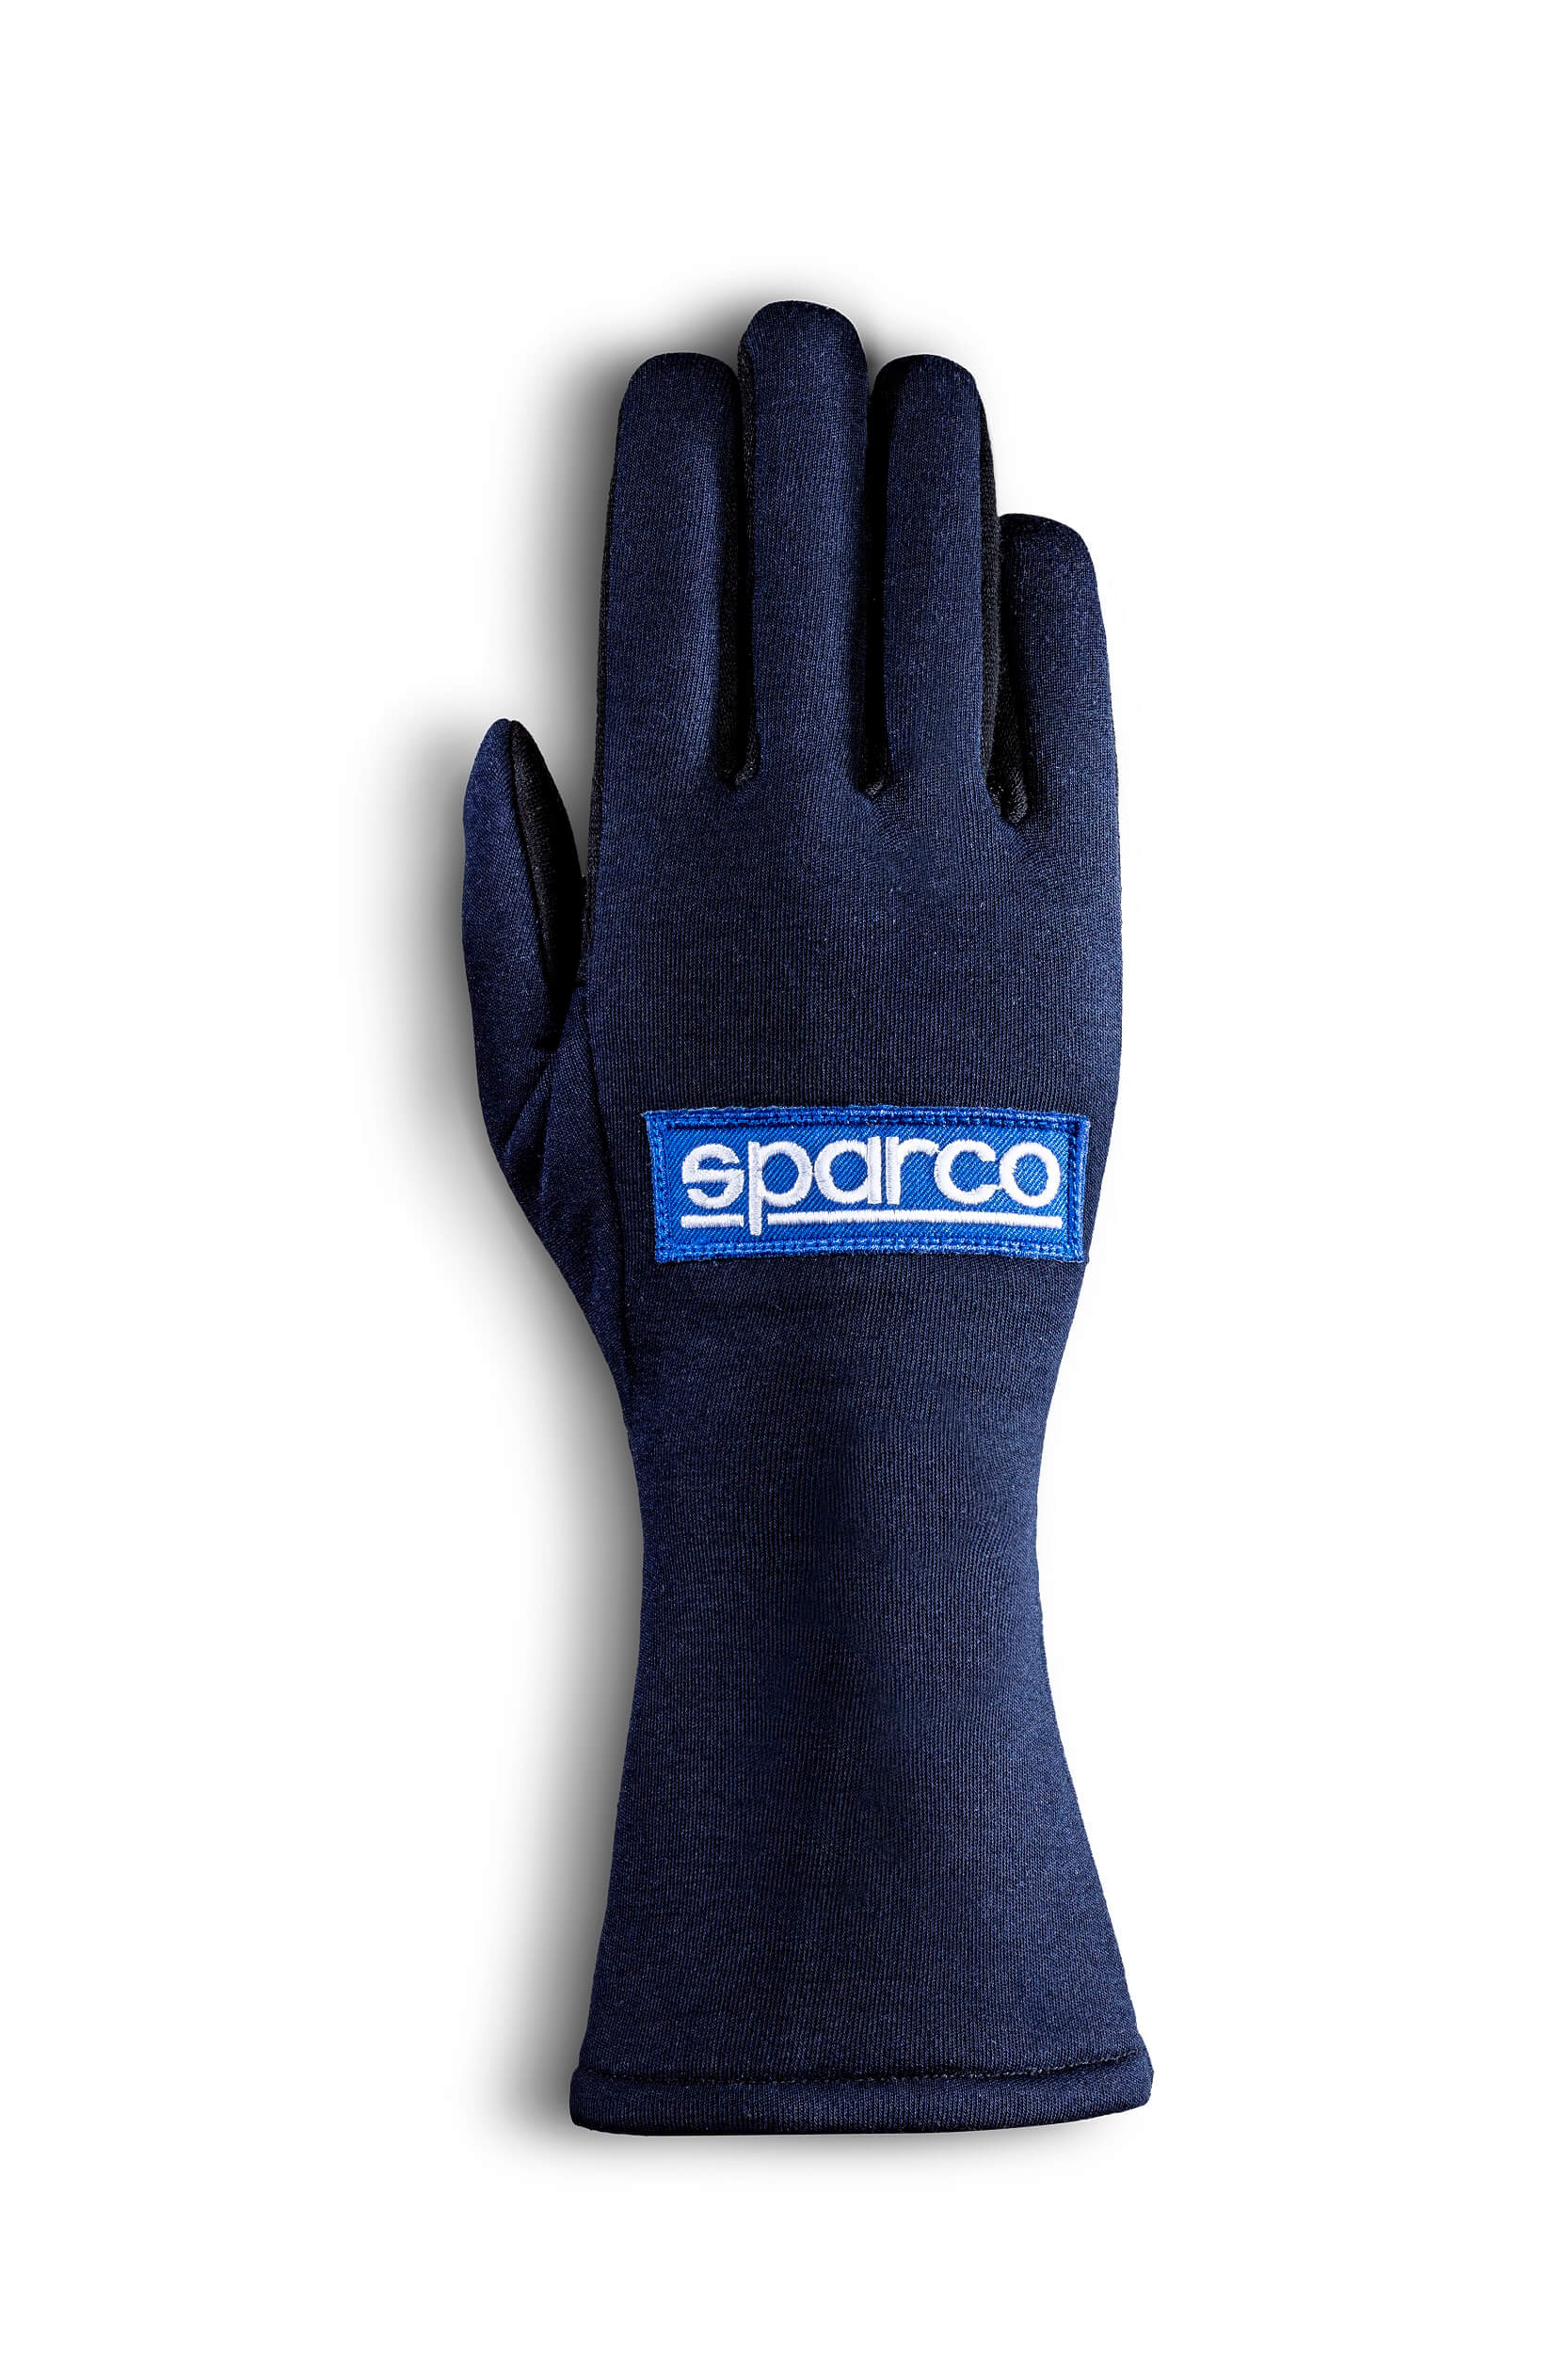 SPARCO 00136411BM LAND CLASSIC Racing gloves, FIA 8856-2018, navy blue, size 11 Photo-0 